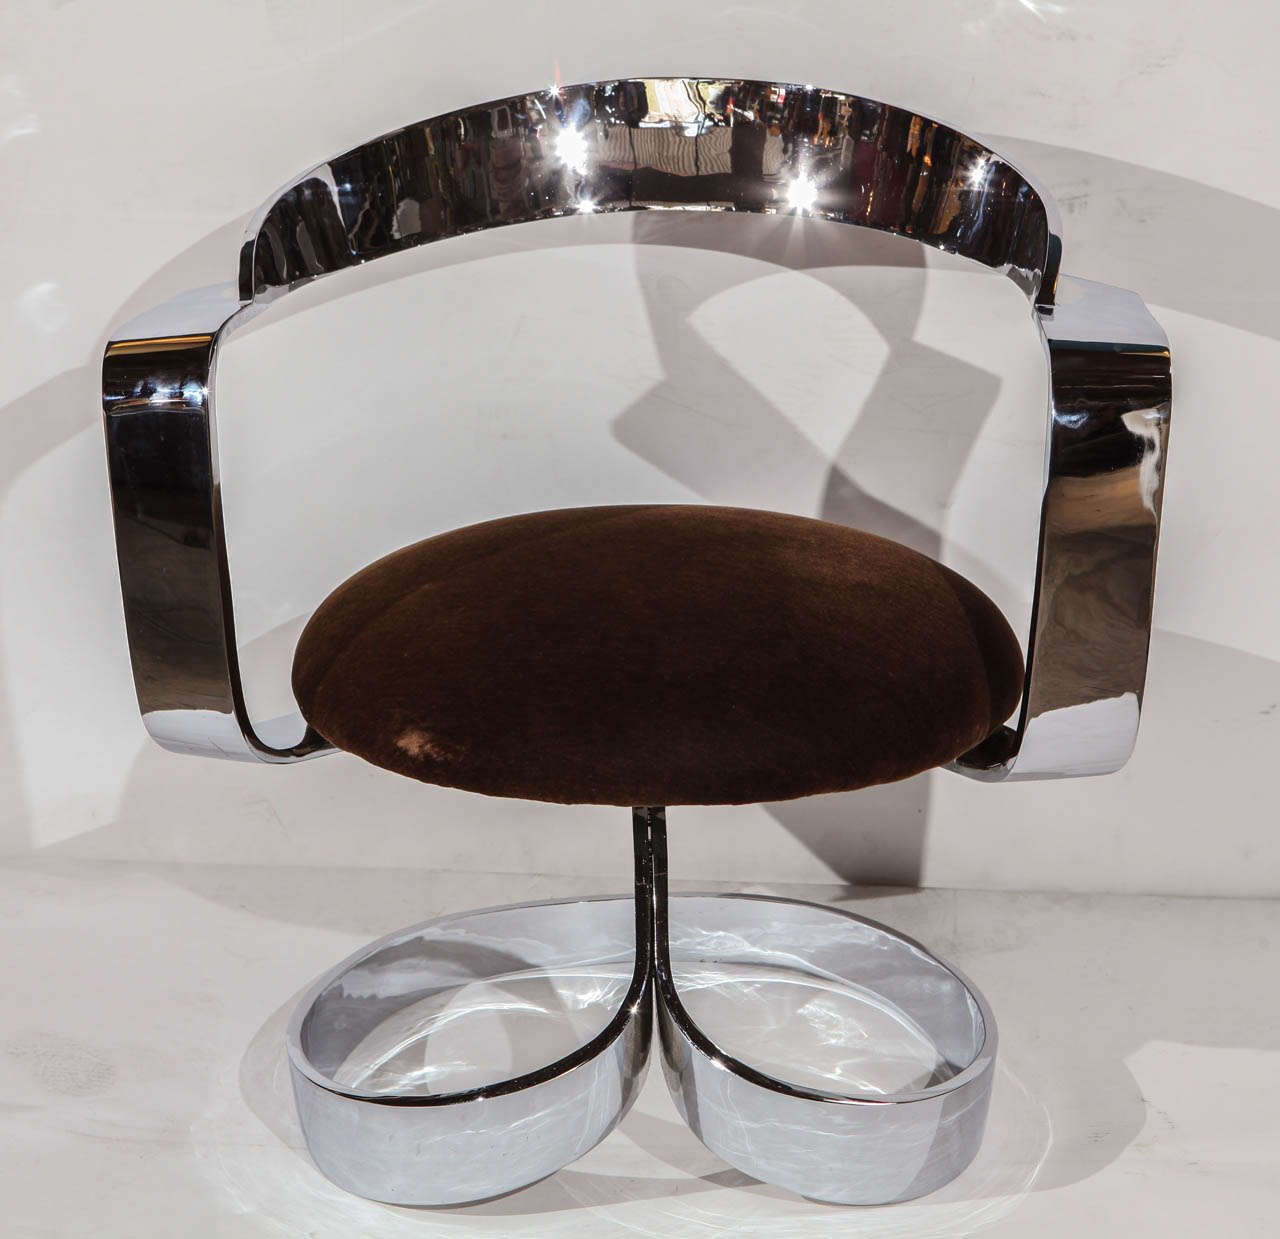 Modern Polished Chrome Plated Steel Ribbon Chair